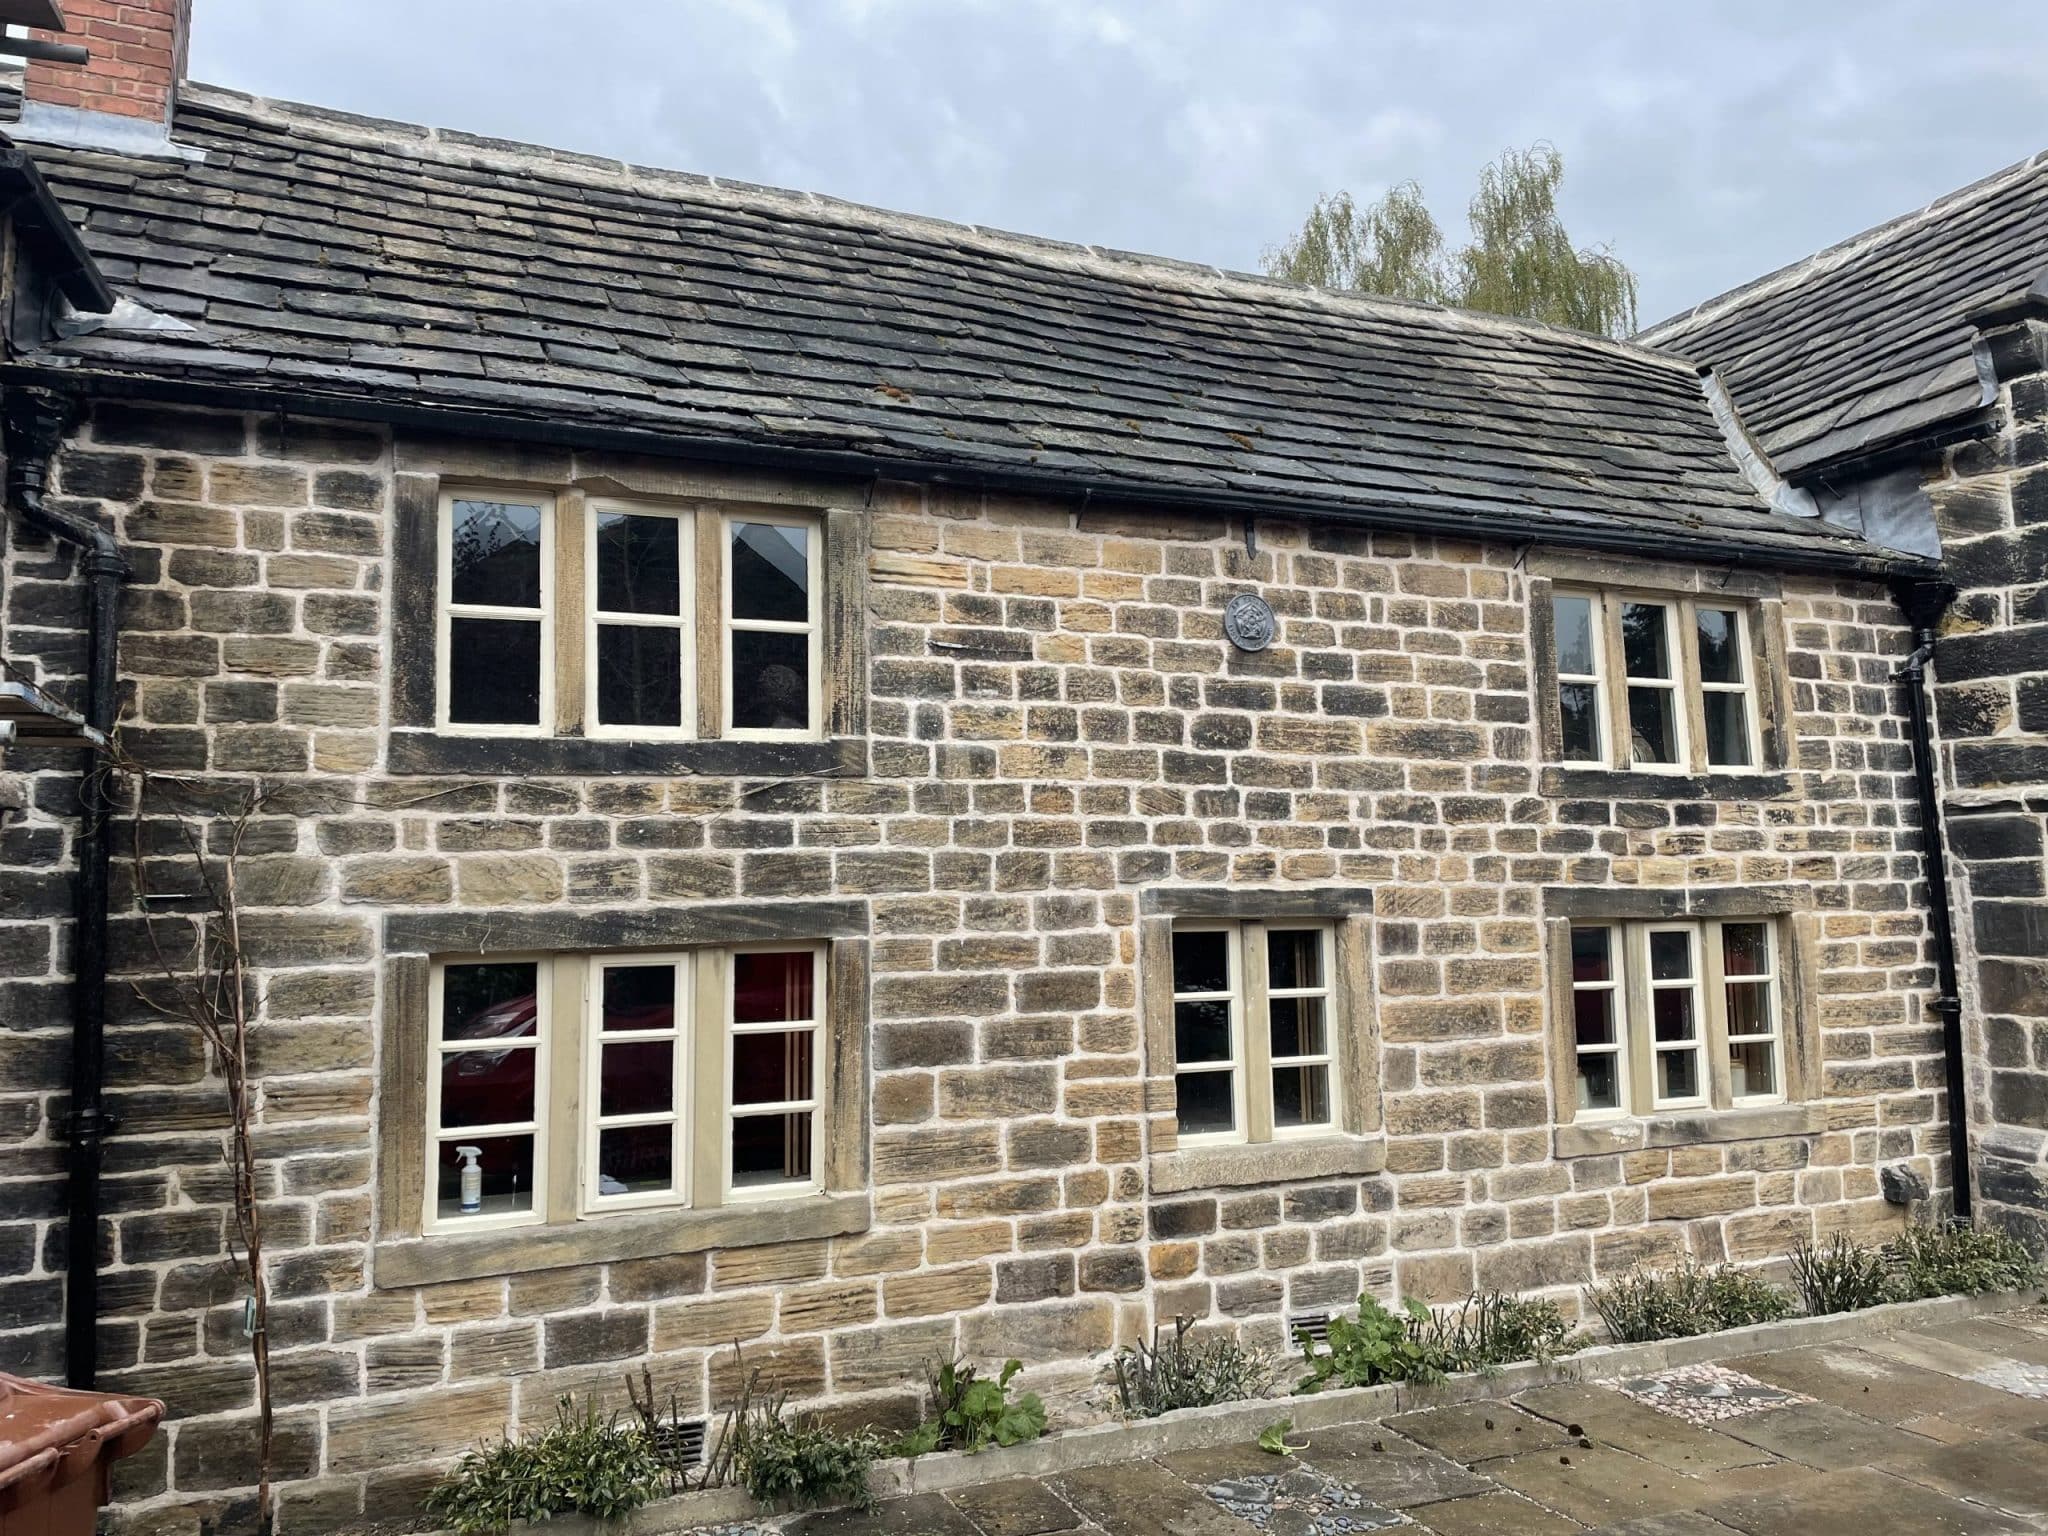 Heritage building preservation. Masonry repairs, hot lime mortar pointing at The old cottage Chapelthorpe, Wakefield, West Yorkshire